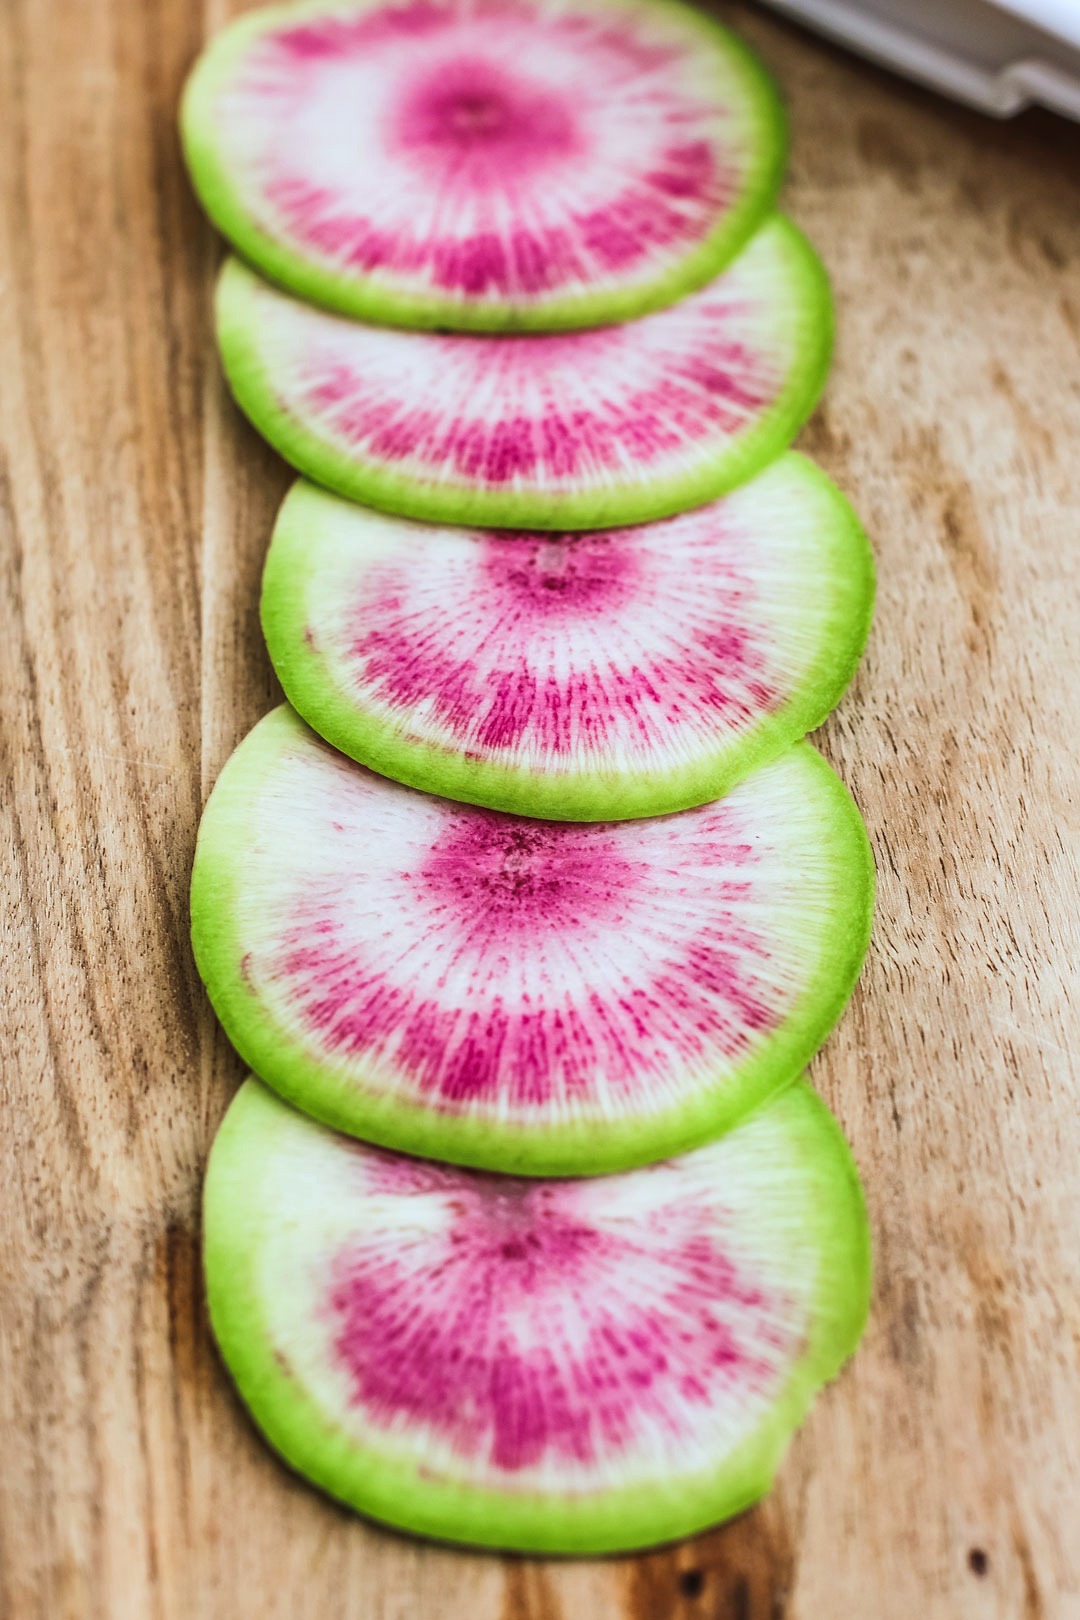 Watermelon Radishes With Anchovy Butter on Sliced Baguette | Killing Thyme